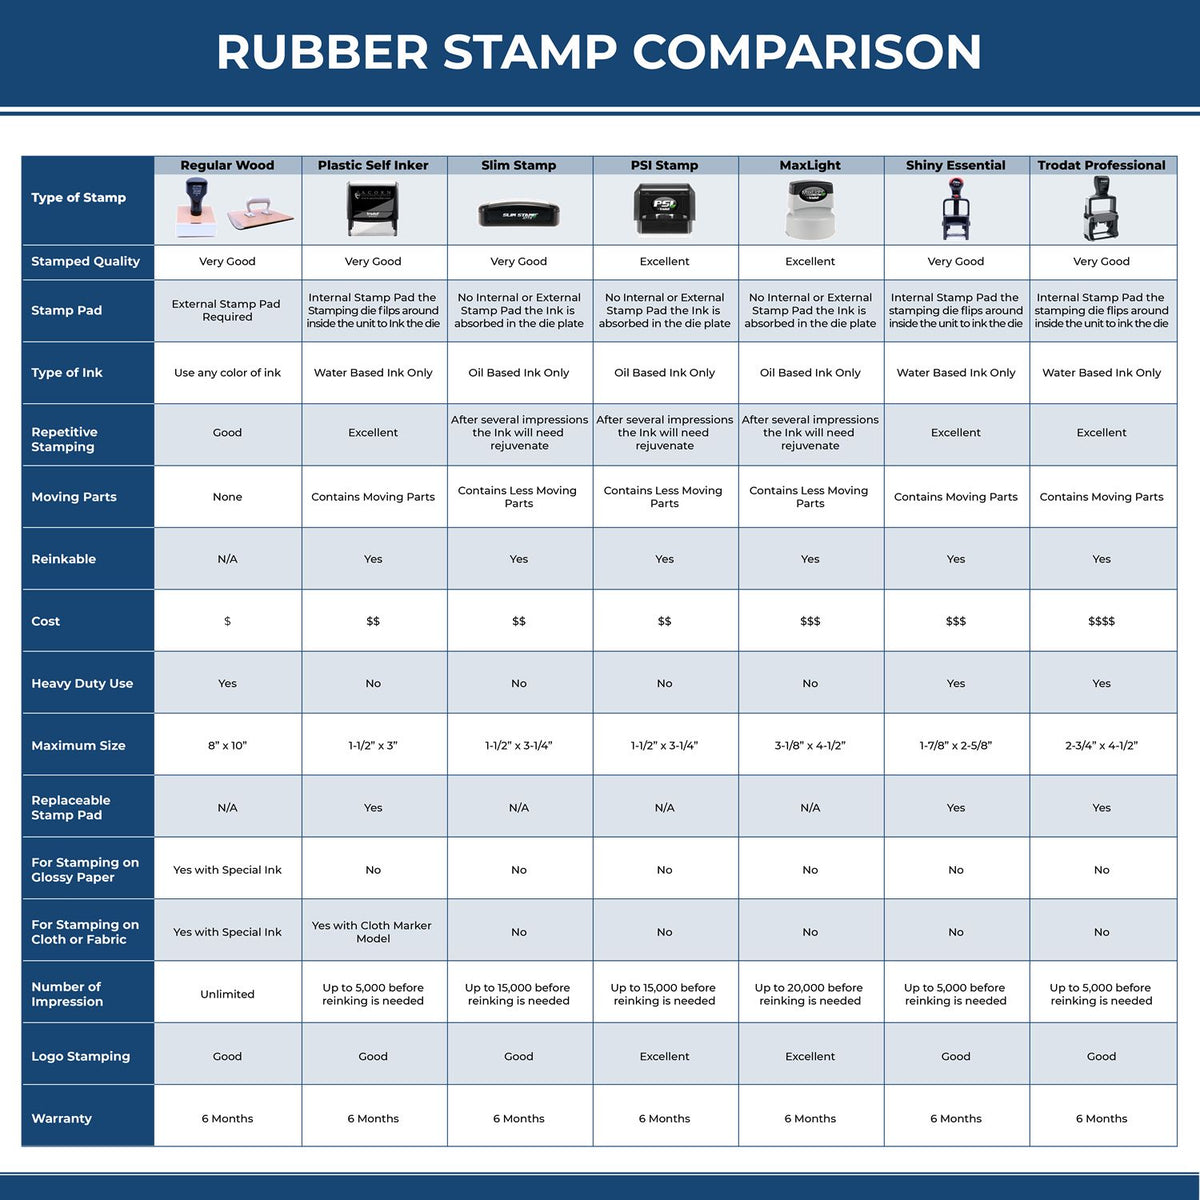 Large Self-Inking Attorneys&#39; Copy Stamp 4881S Rubber Stamp Comparison